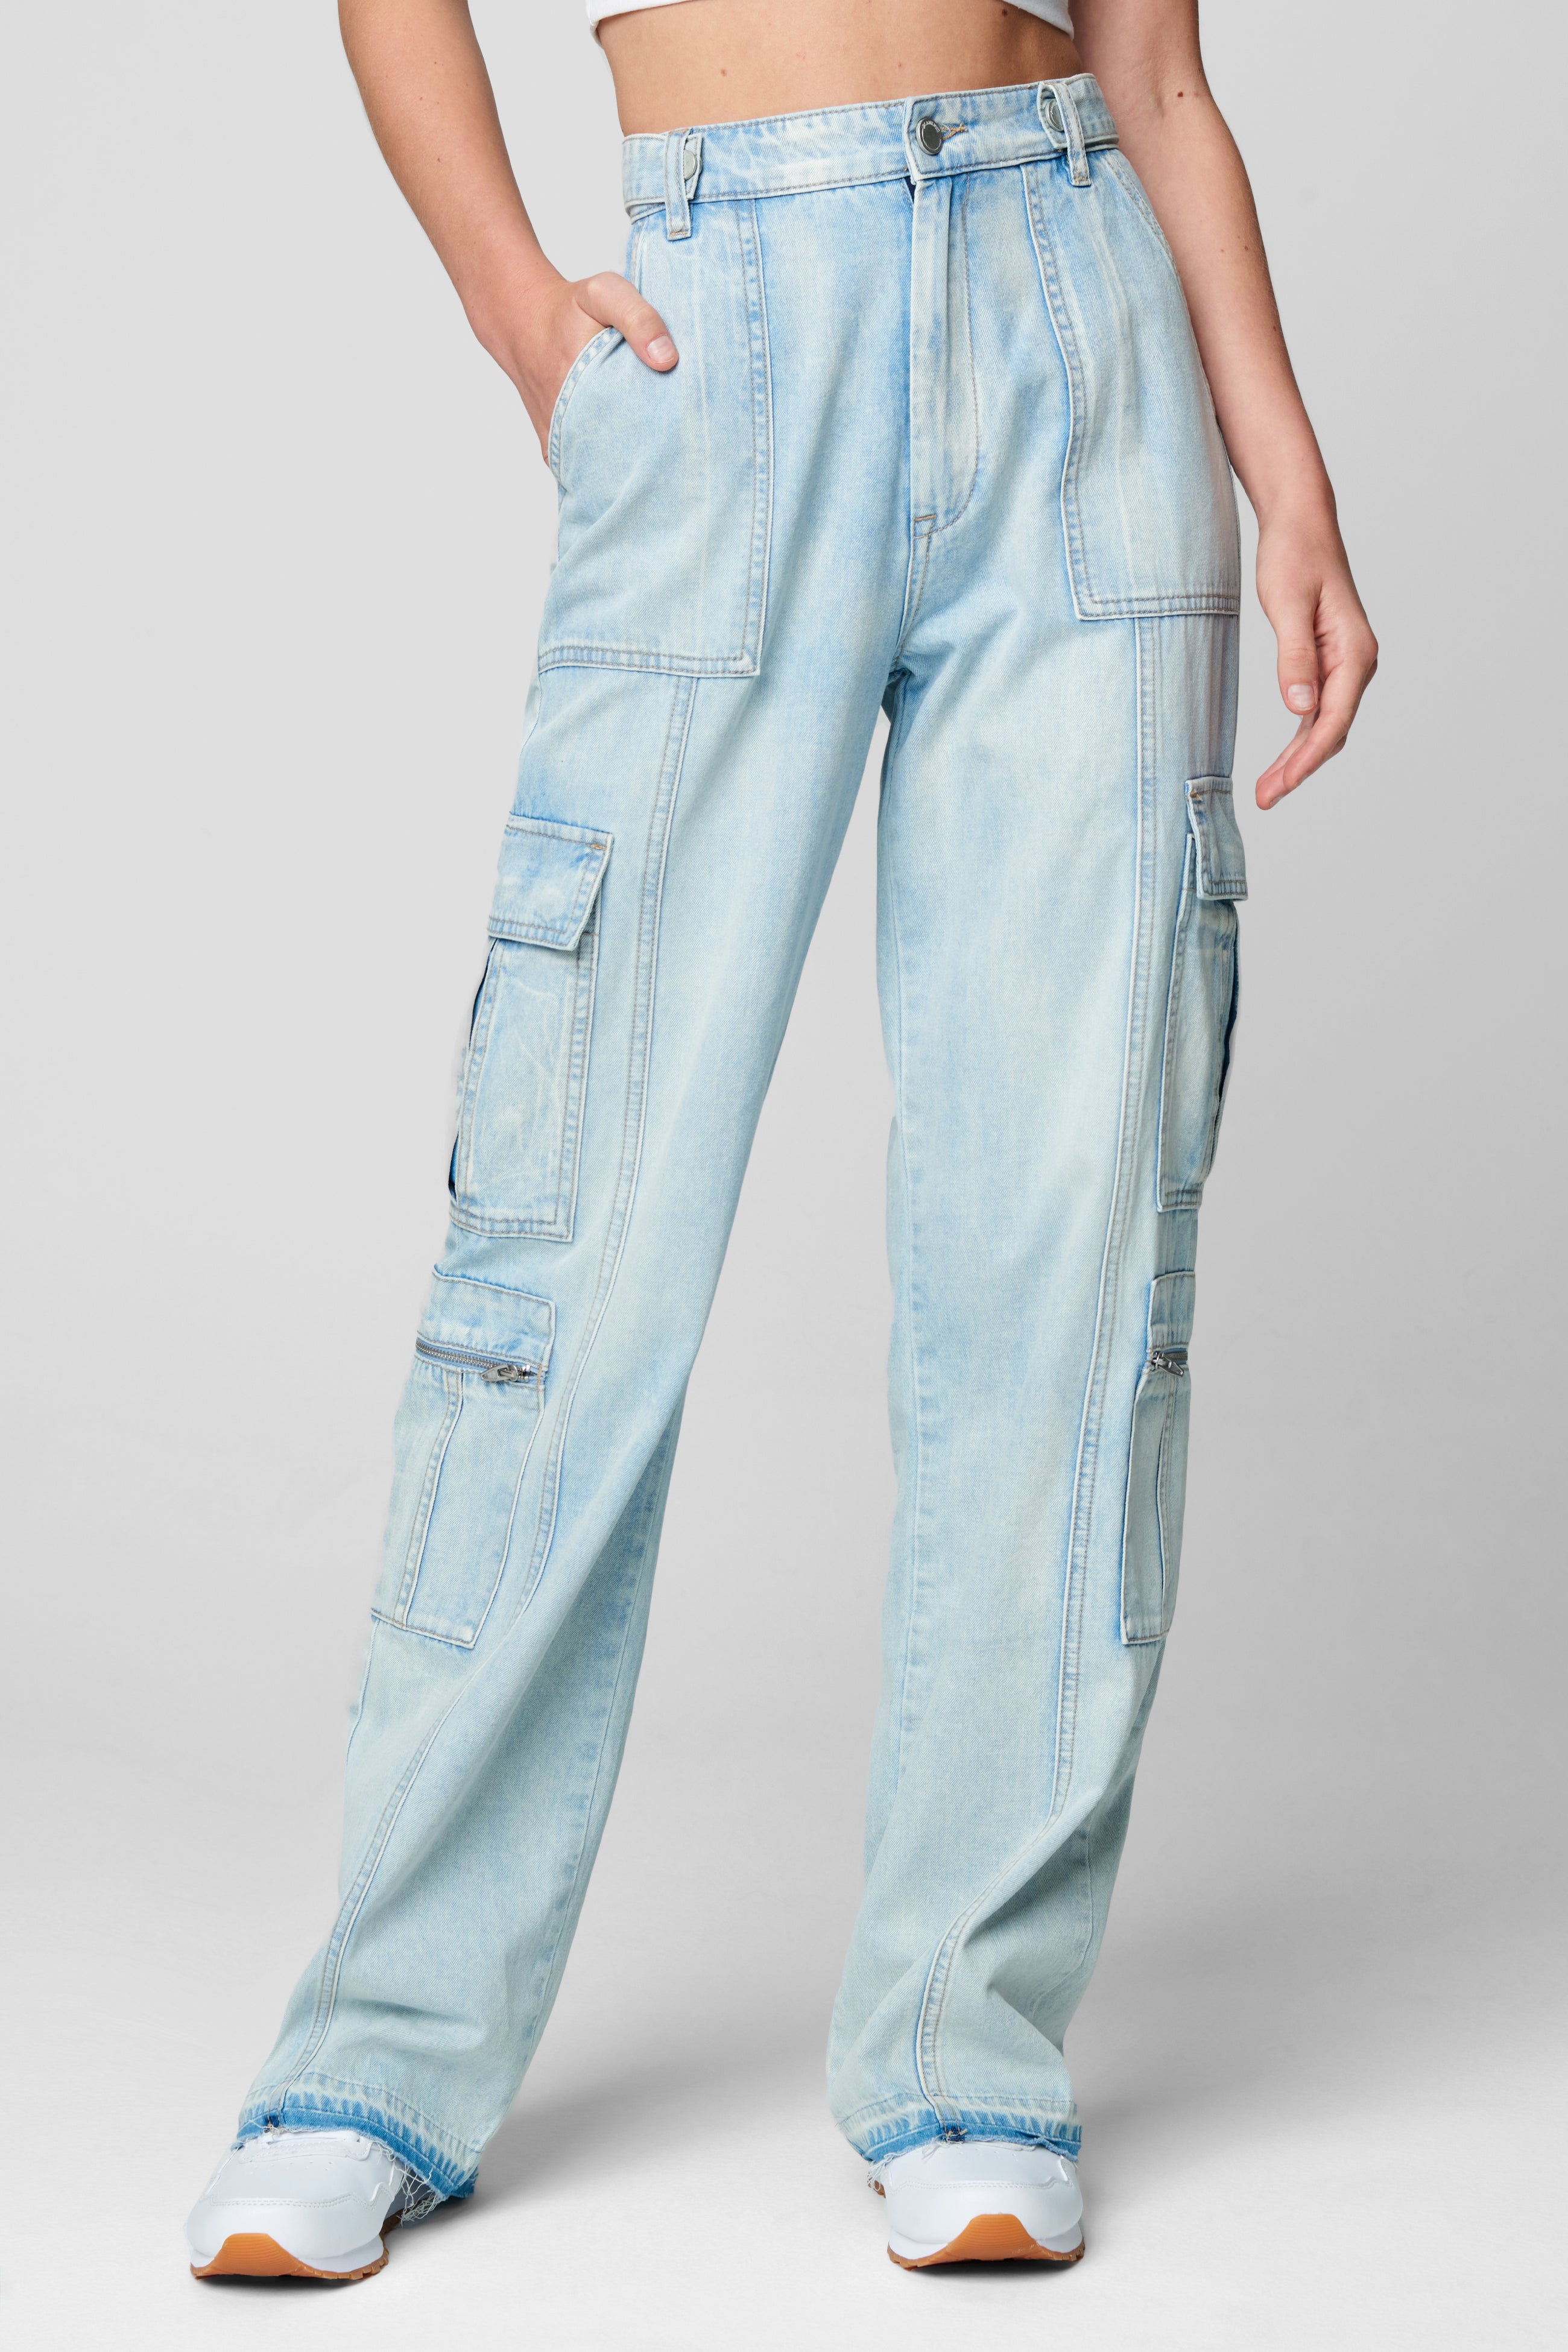 Call My Name Cargo Pants Blue | LIT Boutique